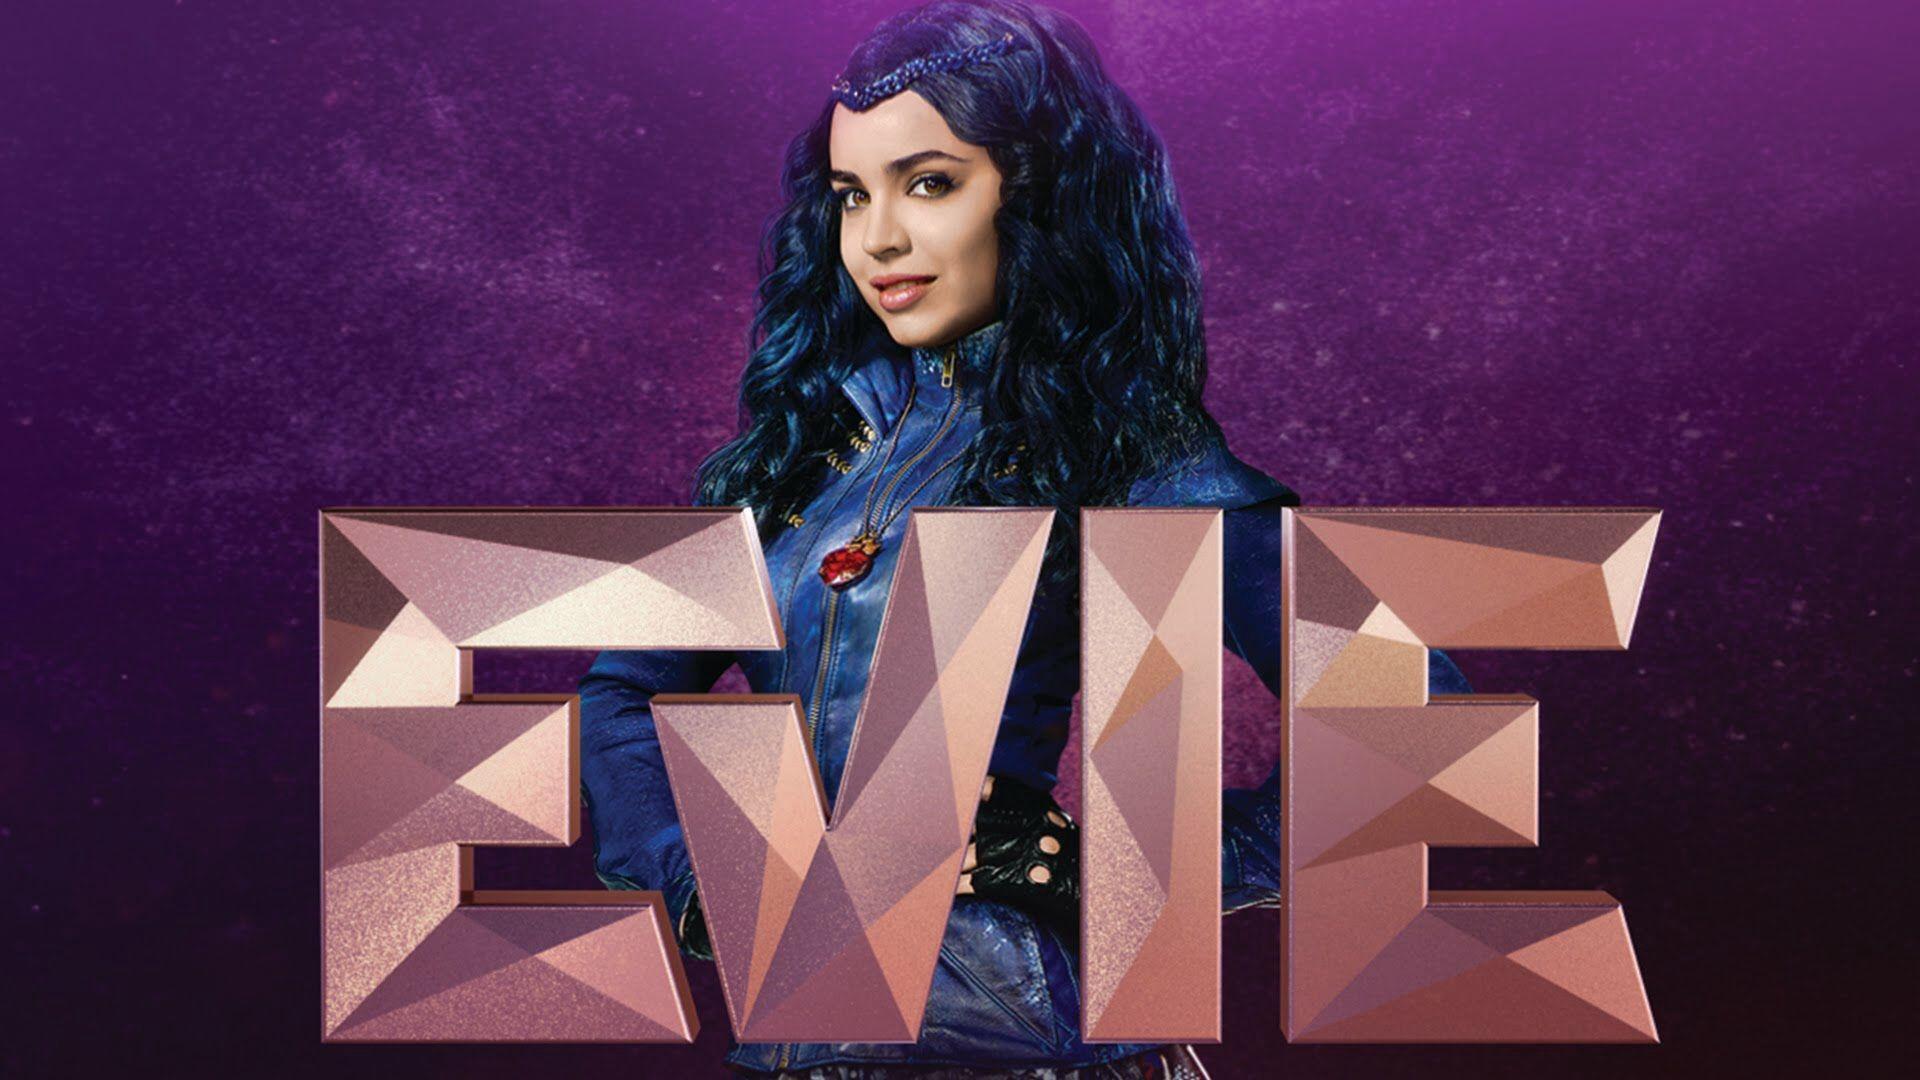 Descendants image Evie HD wallpaper and background photo